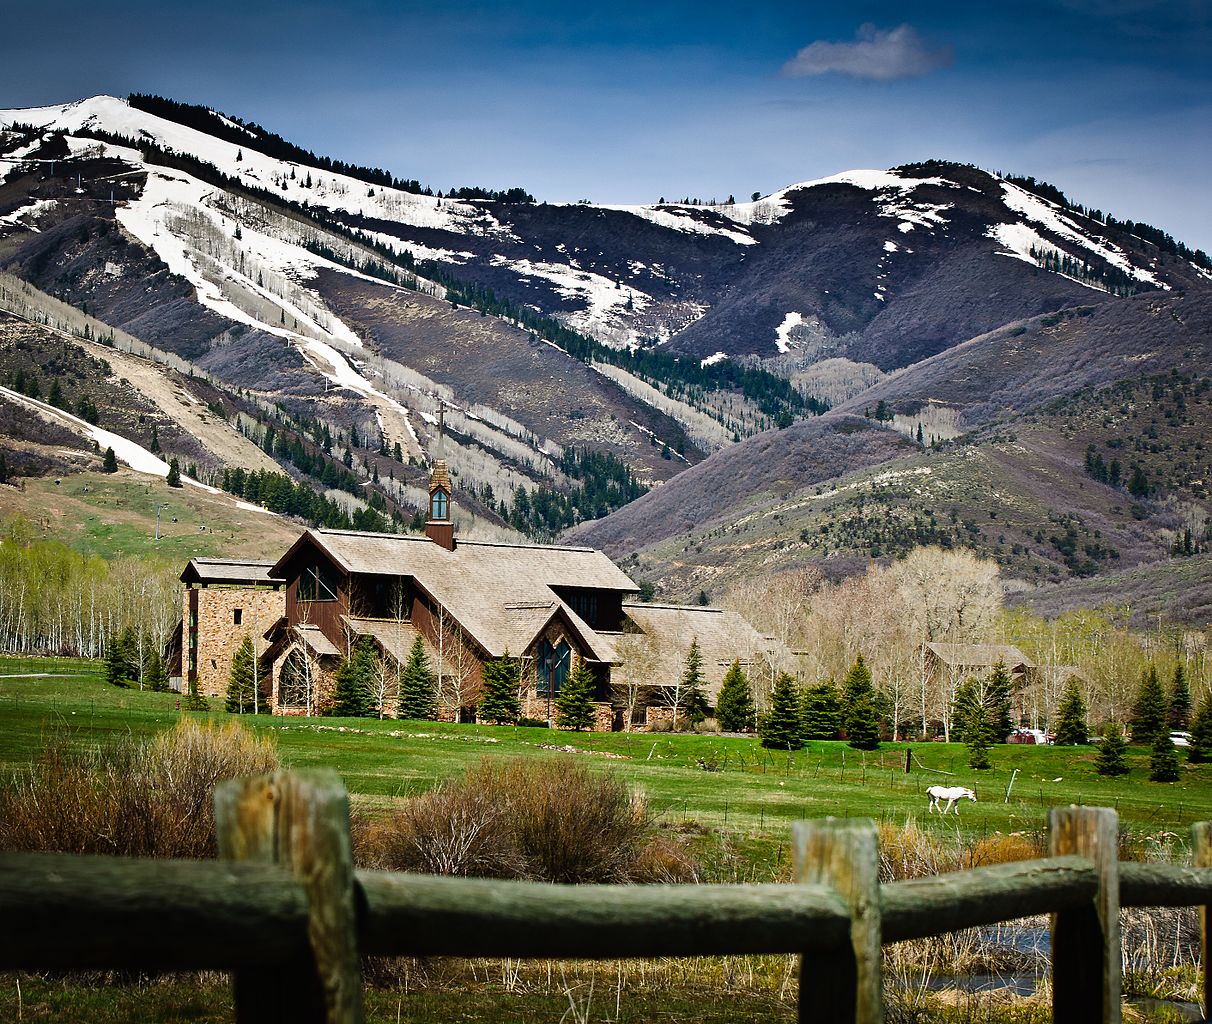 Park City, Depression, and The Compulsion to Write